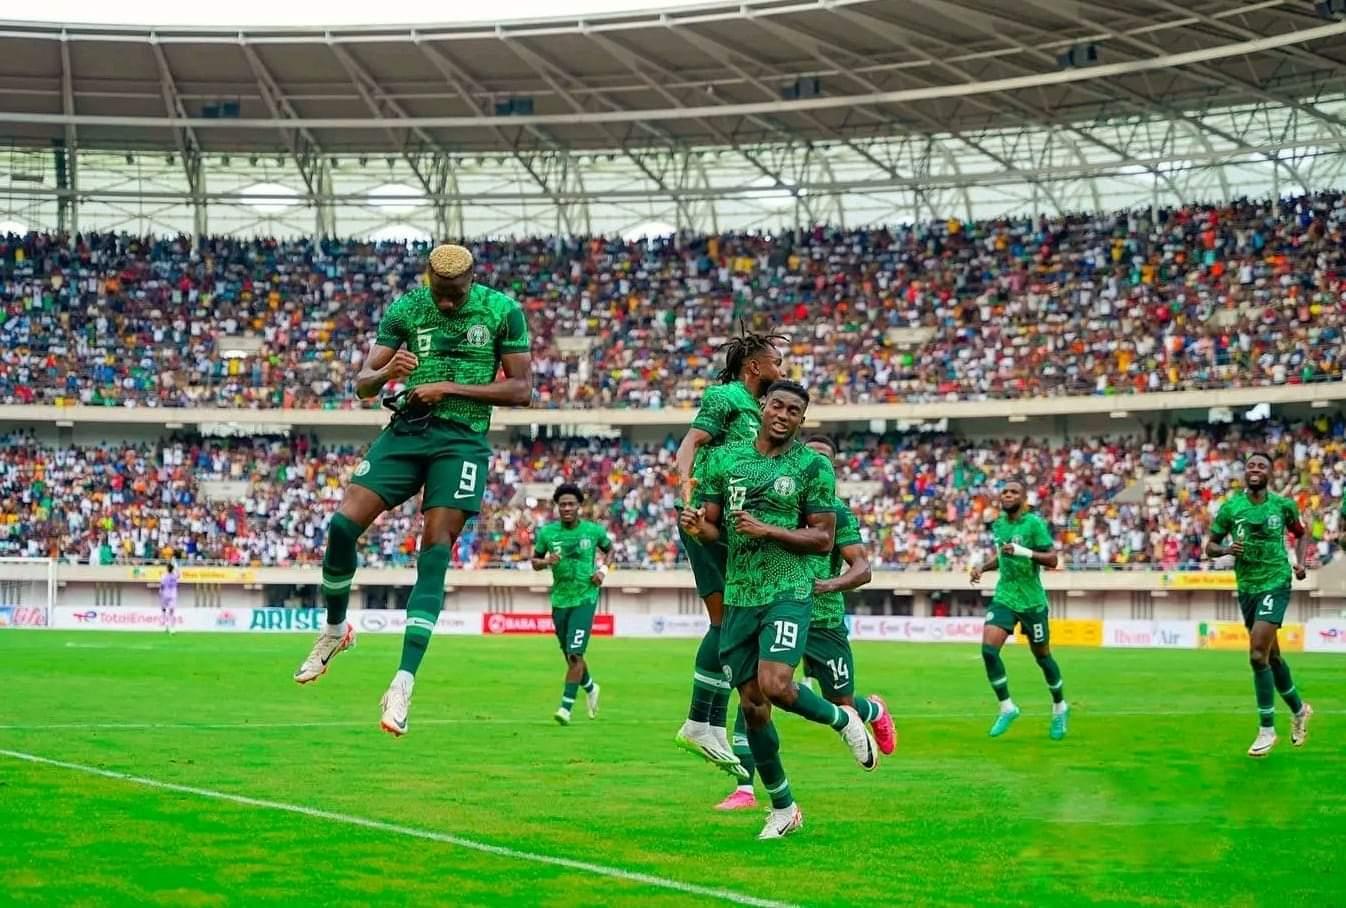 Super Eagles of Nigeria have dropped a place in the latest FIFA rankings released on Thursday.